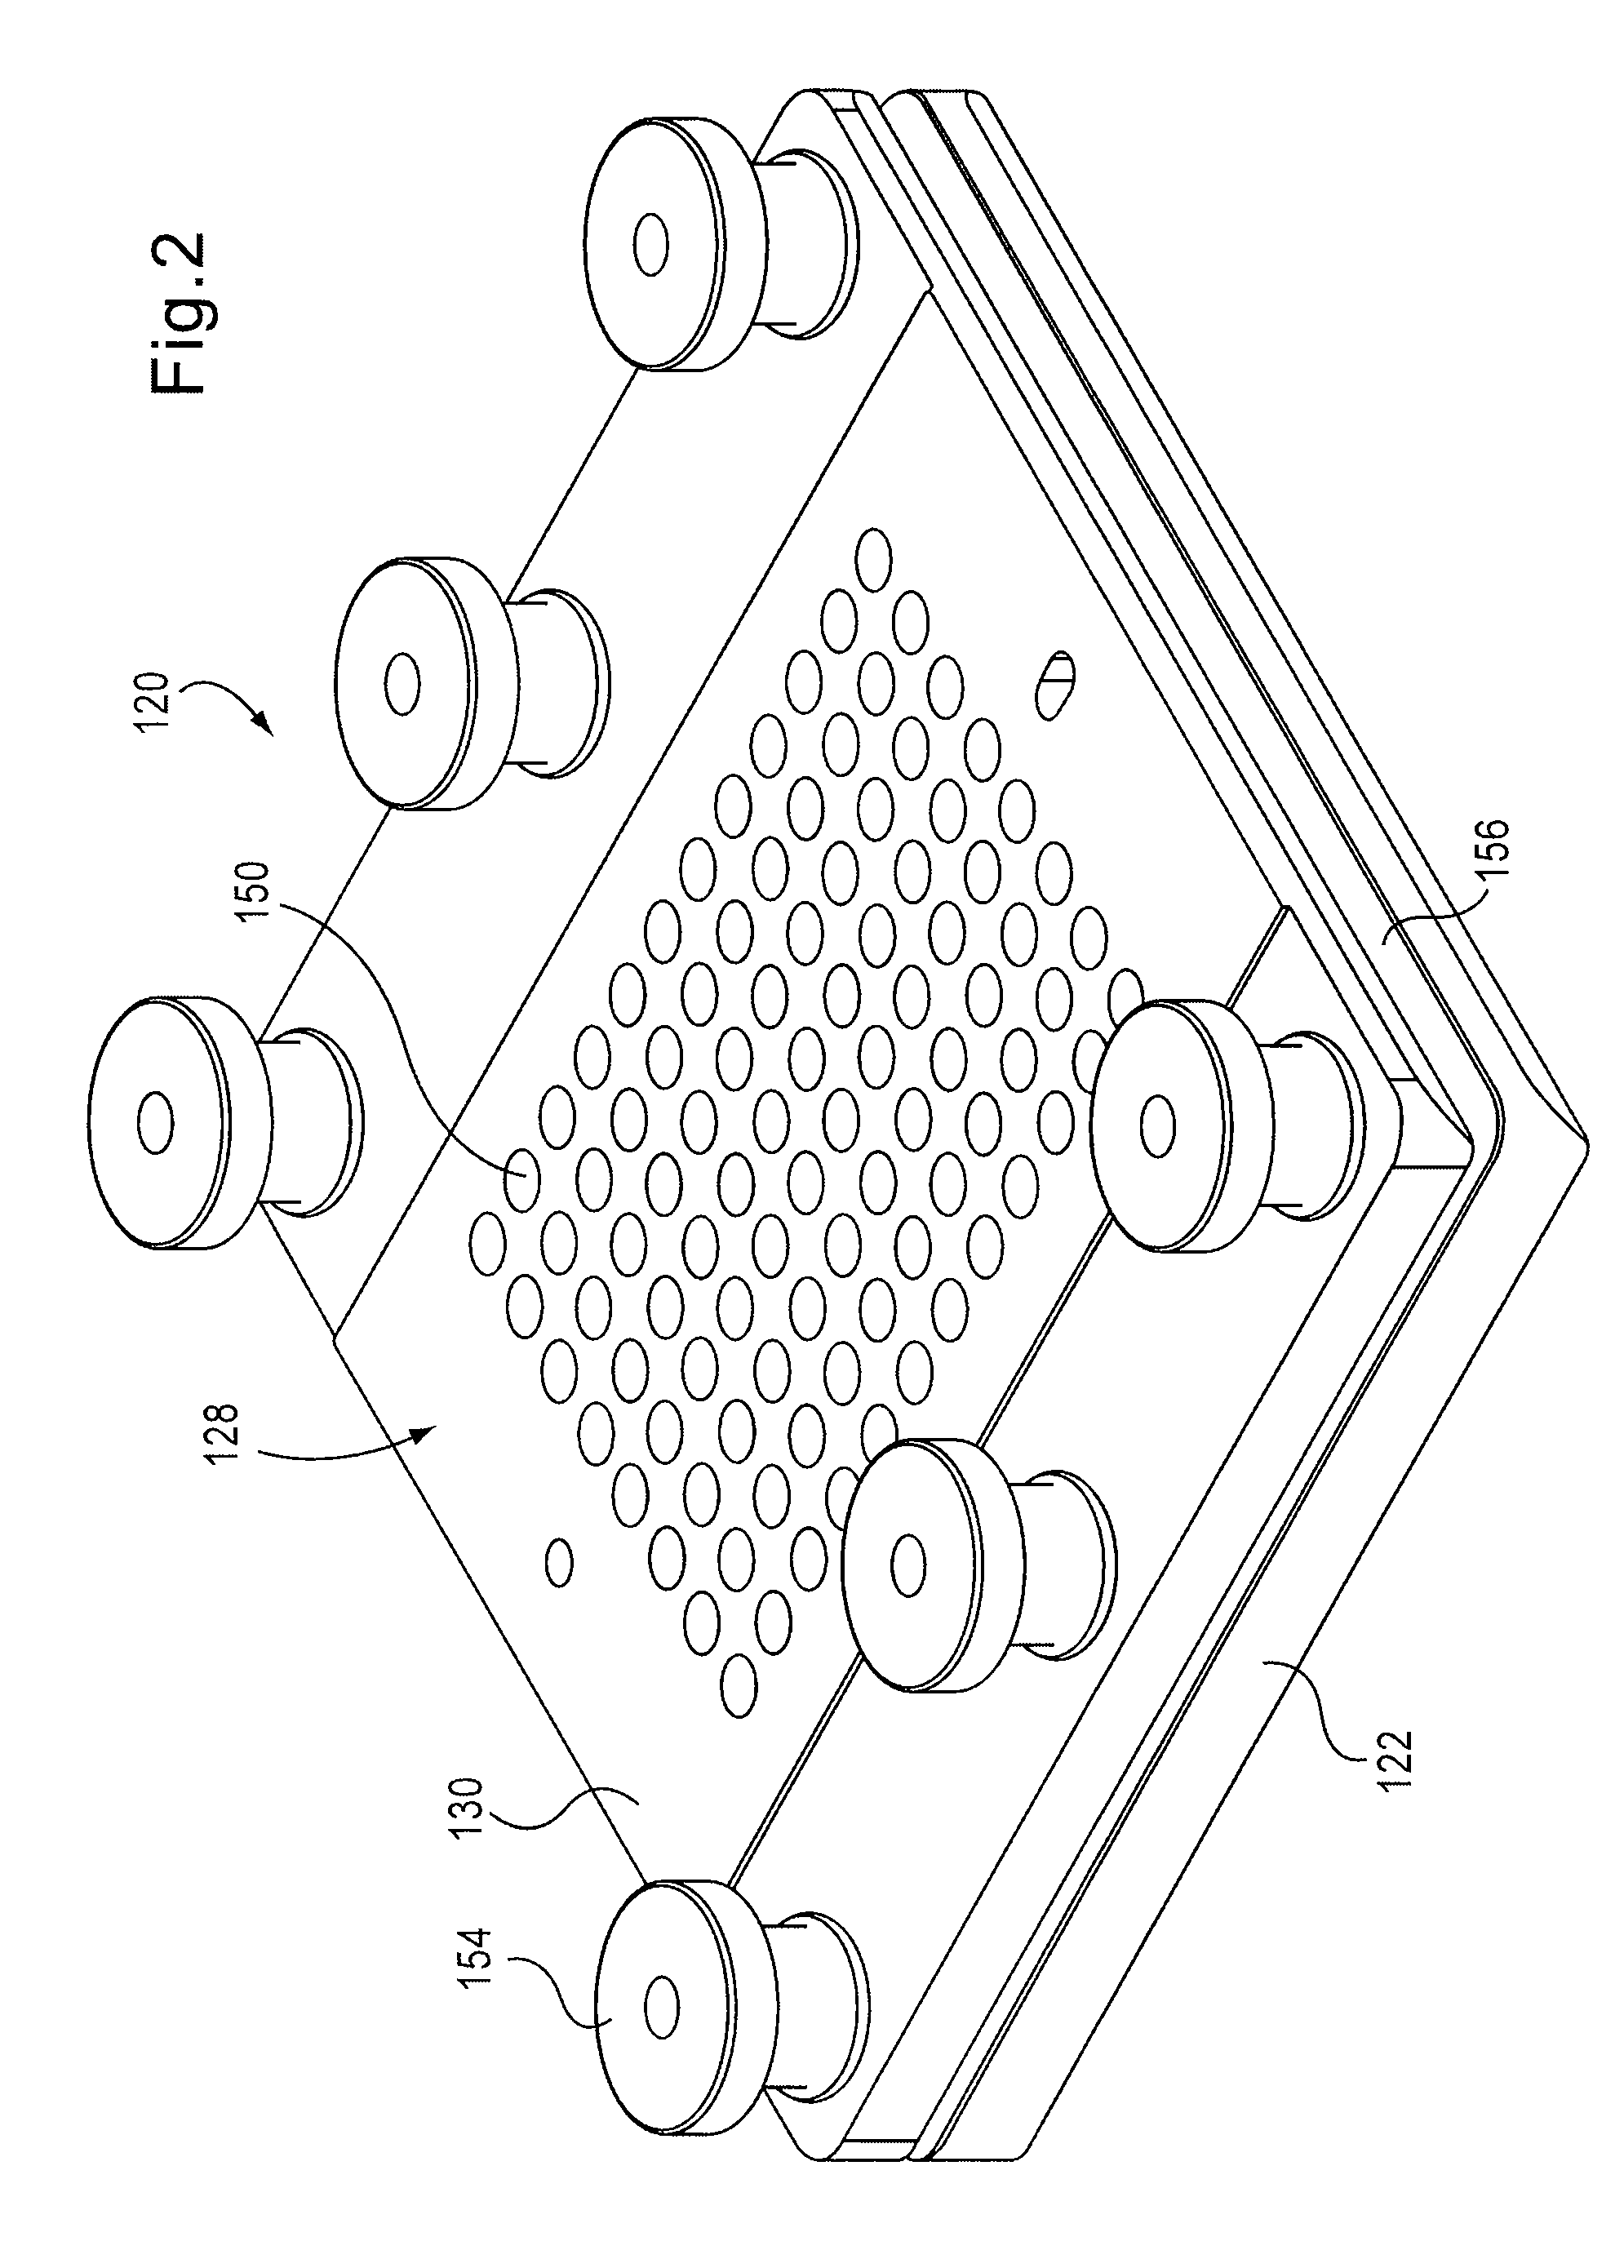 Apparatus and method of performing high-throughput cell-culture studies on biomaterials